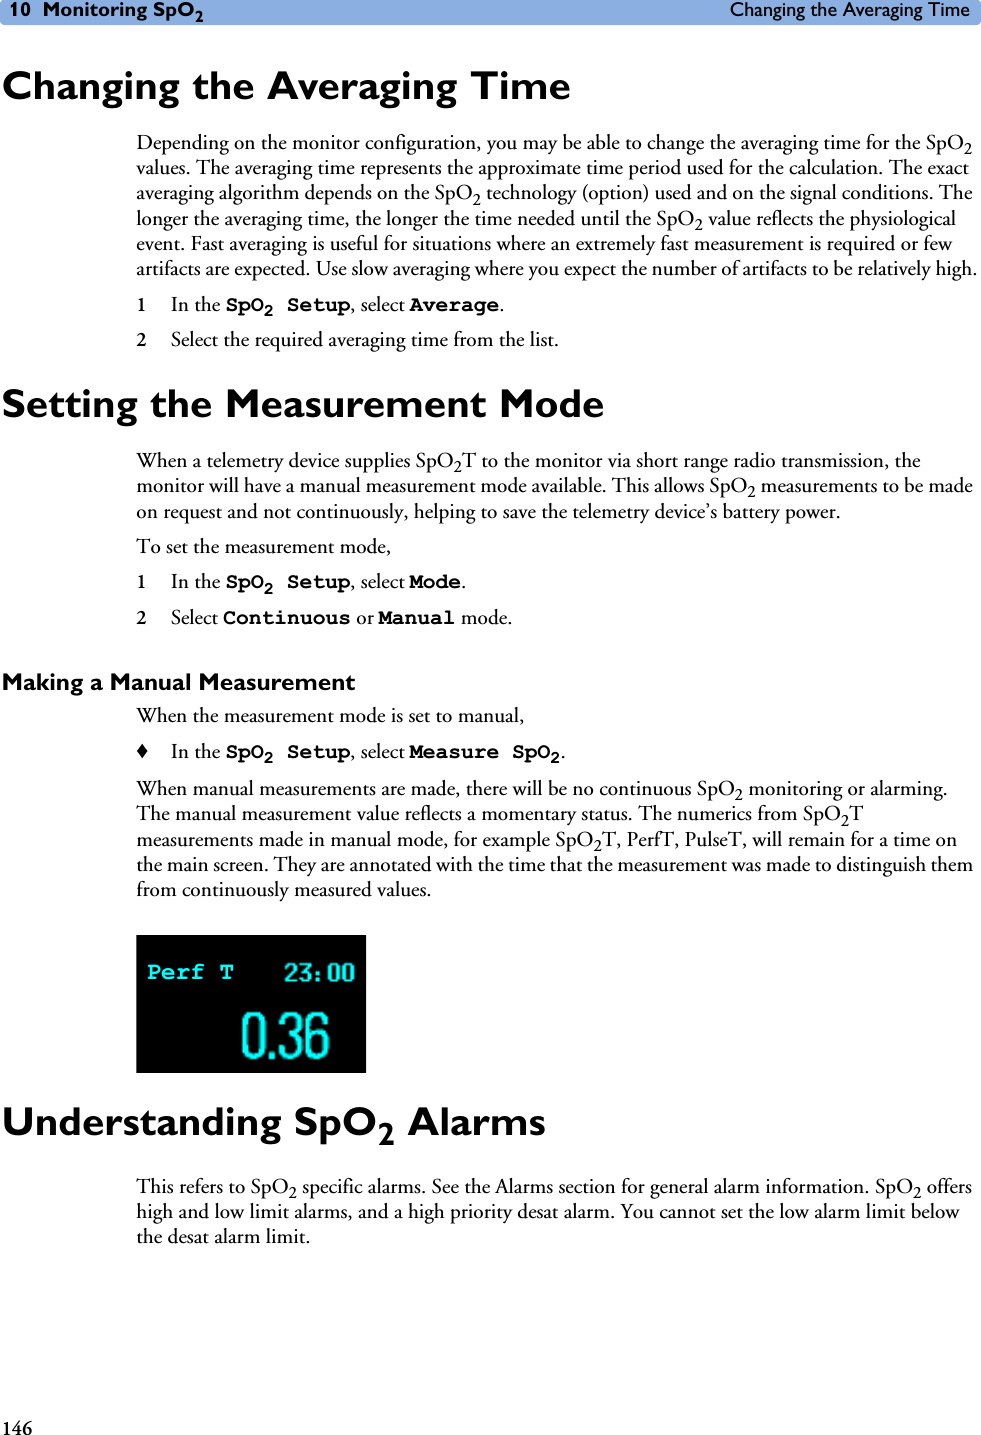 10 Monitoring SpO2Changing the Averaging Time146Changing the Averaging TimeDepending on the monitor configuration, you may be able to change the averaging time for the SpO2 values. The averaging time represents the approximate time period used for the calculation. The exact averaging algorithm depends on the SpO2 technology (option) used and on the signal conditions. The longer the averaging time, the longer the time needed until the SpO2 value reflects the physiological event. Fast averaging is useful for situations where an extremely fast measurement is required or few artifacts are expected. Use slow averaging where you expect the number of artifacts to be relatively high.1In the SpO2 Setup, select Average.2Select the required averaging time from the list. Setting the Measurement ModeWhen a telemetry device supplies SpO2T to the monitor via short range radio transmission, the monitor will have a manual measurement mode available. This allows SpO2 measurements to be made on request and not continuously, helping to save the telemetry device’s battery power. To set the measurement mode, 1In the SpO2 Setup, select Mode.2Select Continuous or Manual mode.Making a Manual MeasurementWhen the measurement mode is set to manual, ♦In the SpO2 Setup, select Measure SpO2.When manual measurements are made, there will be no continuous SpO2 monitoring or alarming. The manual measurement value reflects a momentary status. The numerics from SpO2T measurements made in manual mode, for example SpO2T, PerfT, PulseT, will remain for a time on the main screen. They are annotated with the time that the measurement was made to distinguish them from continuously measured values. Understanding SpO2 AlarmsThis refers to SpO2 specific alarms. See the Alarms section for general alarm information. SpO2 offers high and low limit alarms, and a high priority desat alarm. You cannot set the low alarm limit below the desat alarm limit.Perf T